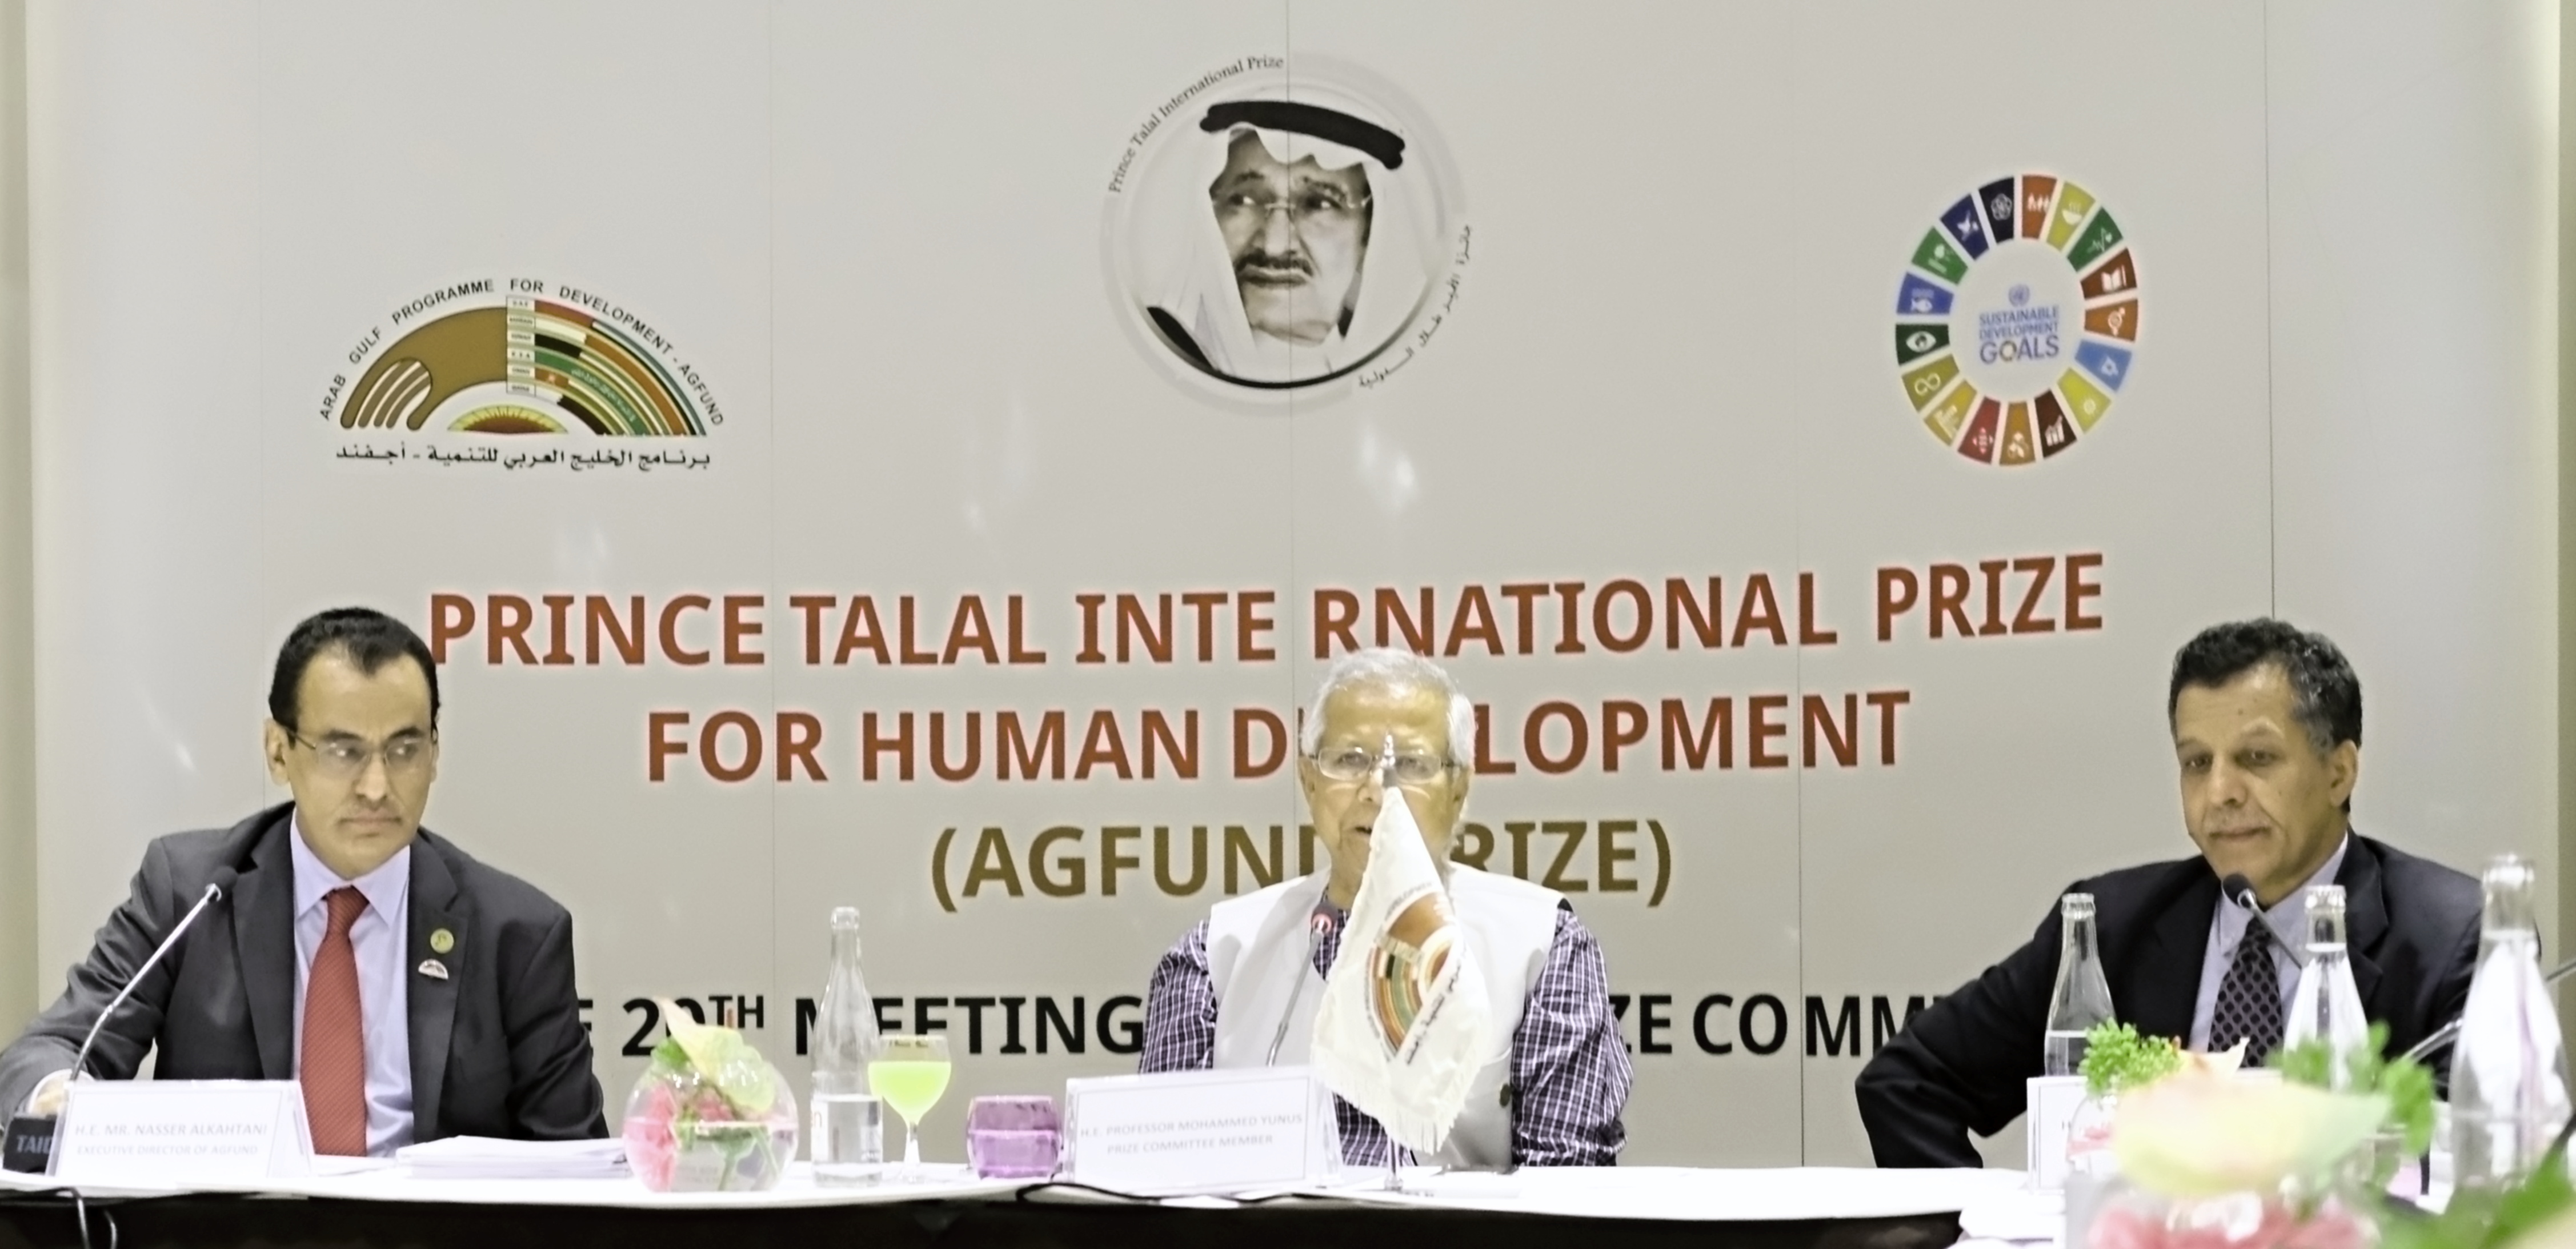 The Arab Gulf Programme for Development (AGFUND) announced the winners of the USD one million-worth Prince Talal International Prize for Human Development for 2018.